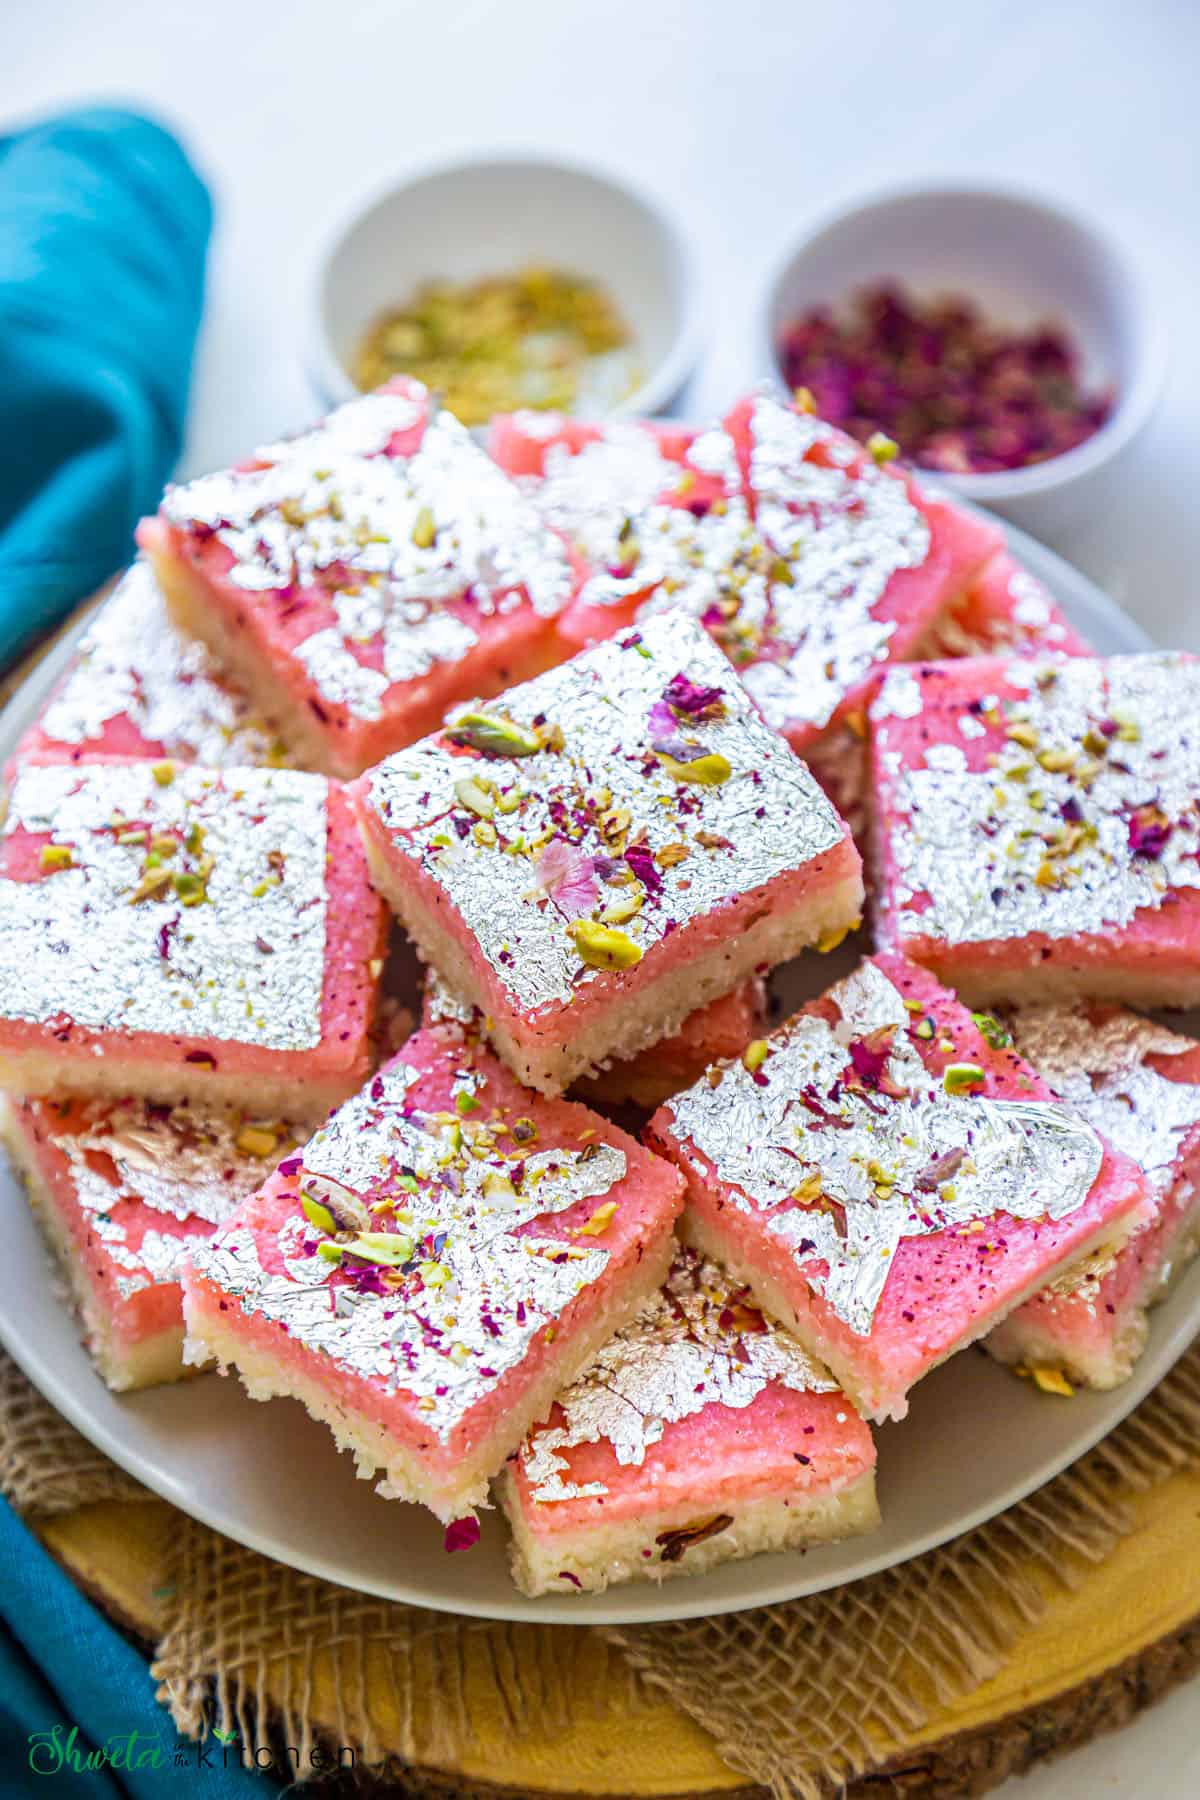 Coconut Burfi garnished with pistachios and rose petals arranged in circular pattern on a plate